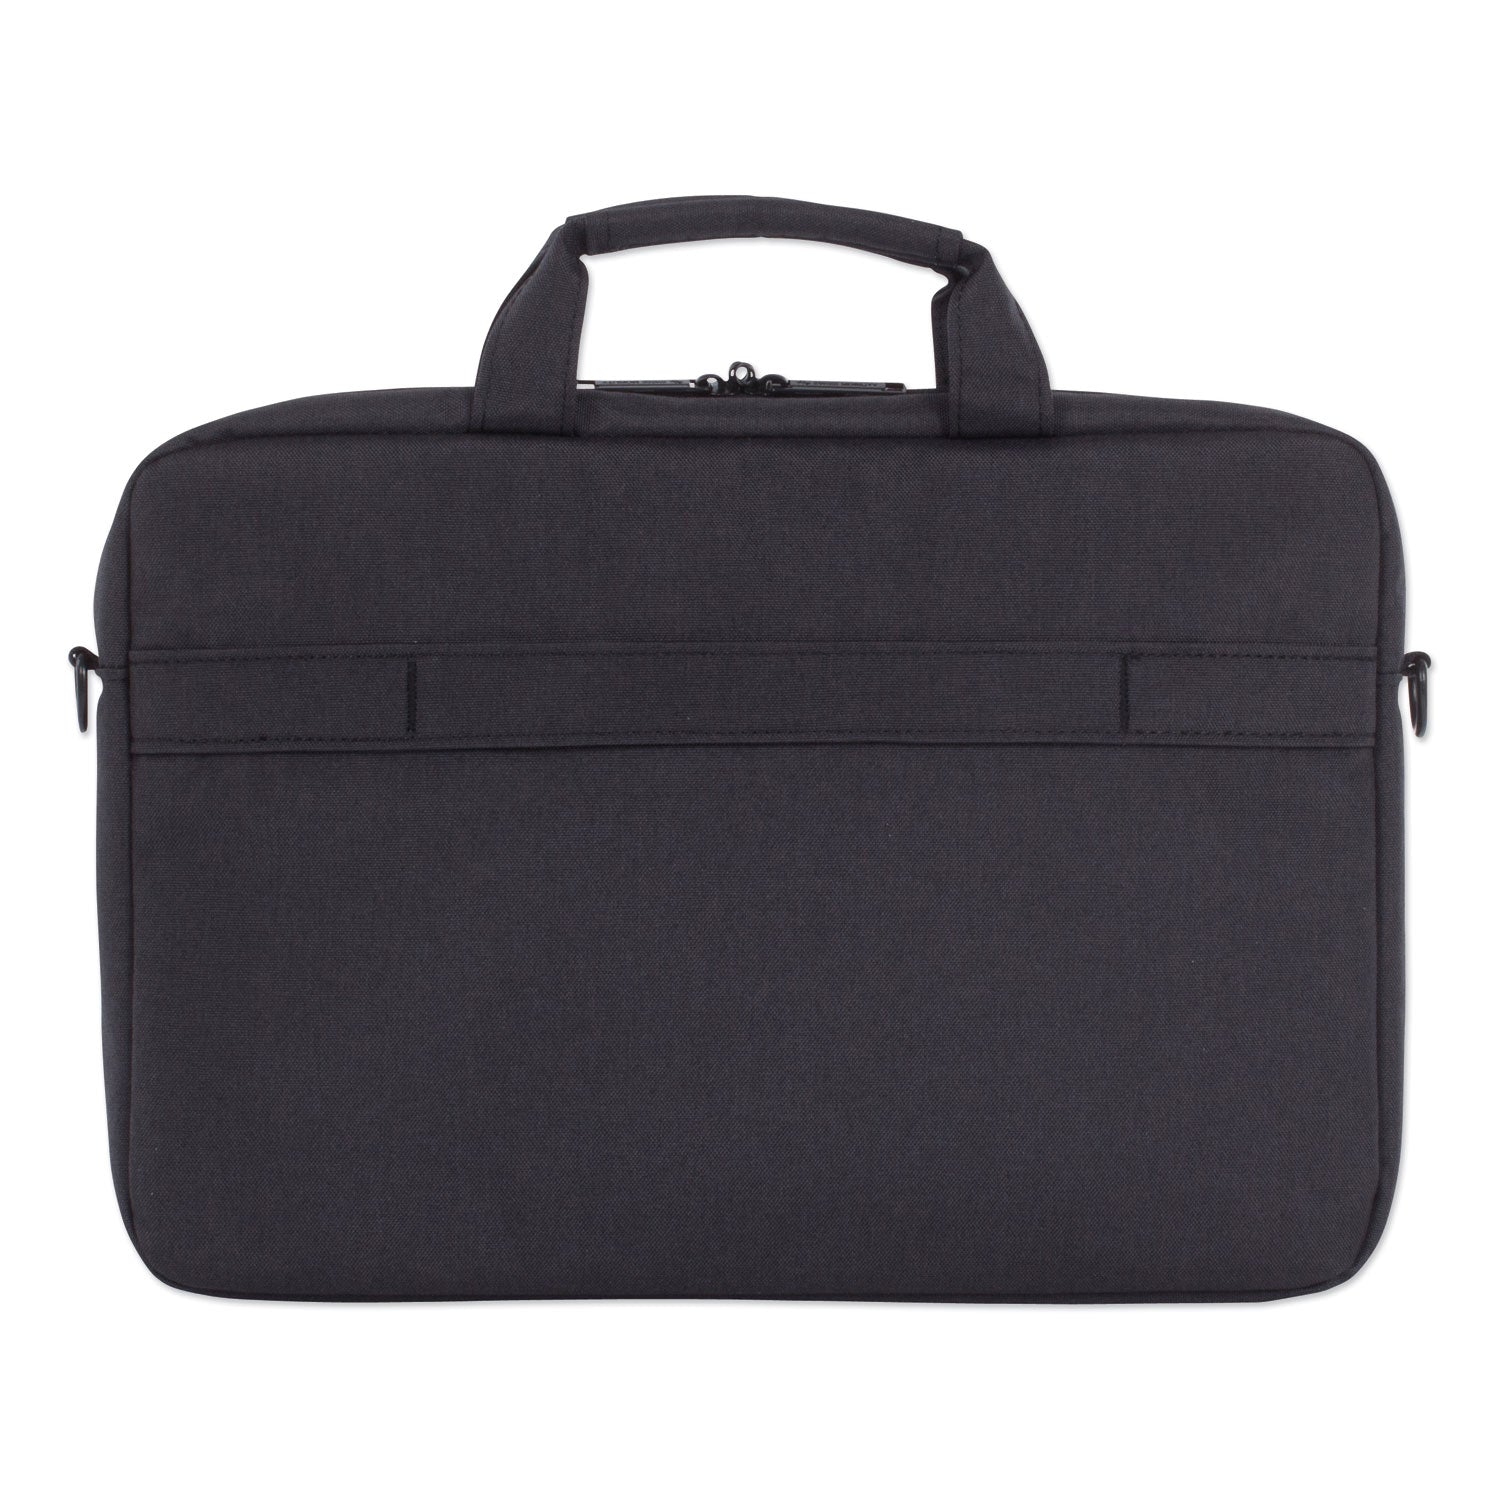 cadence-slim-briefcase-fits-devices-up-to-156-polyester-35-x-35-x-16-charcoal_swzexb1010smch - 4